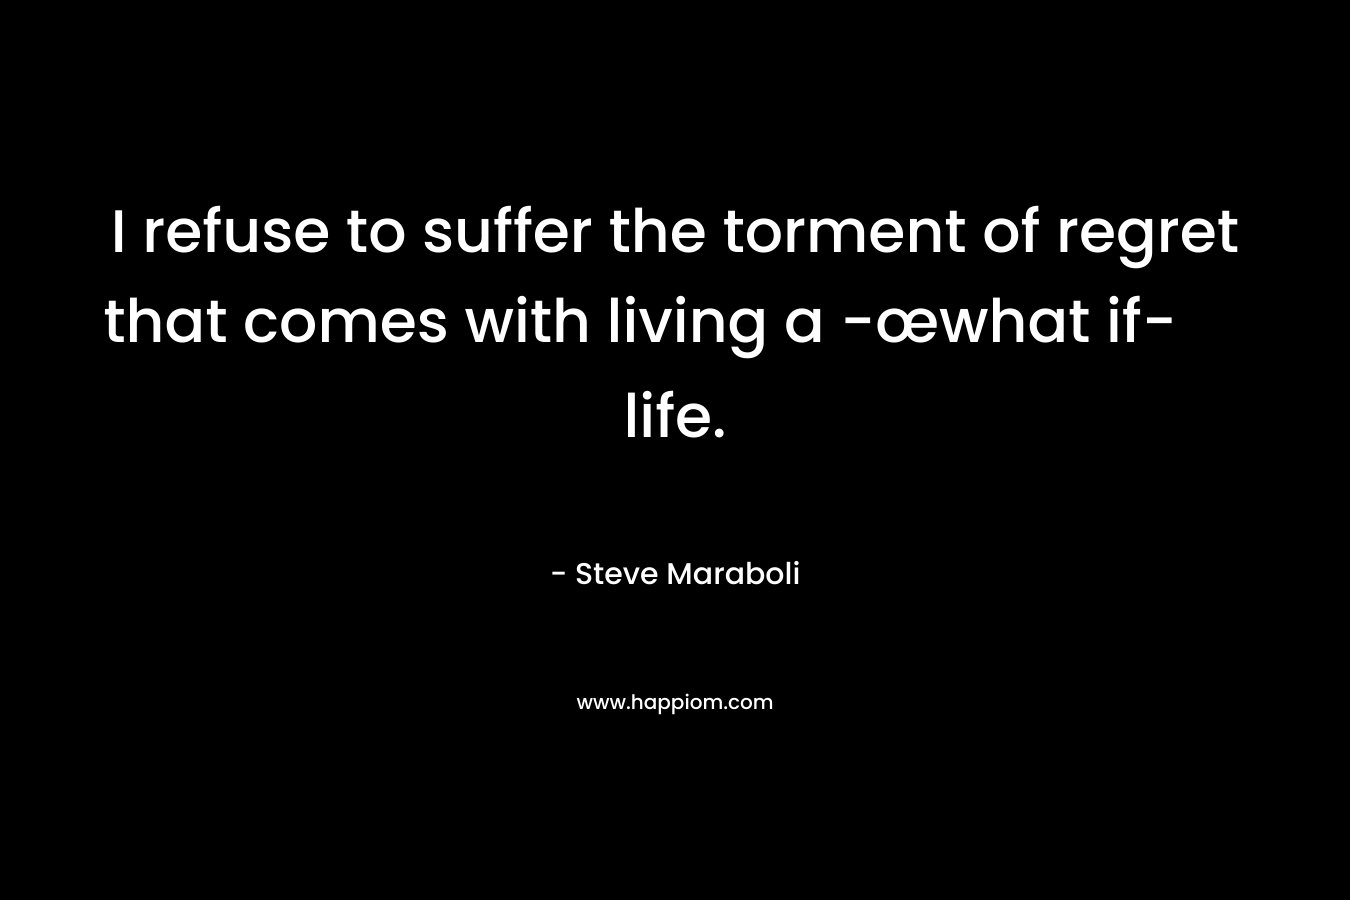 I refuse to suffer the torment of regret that comes with living a -œwhat if- life. – Steve Maraboli